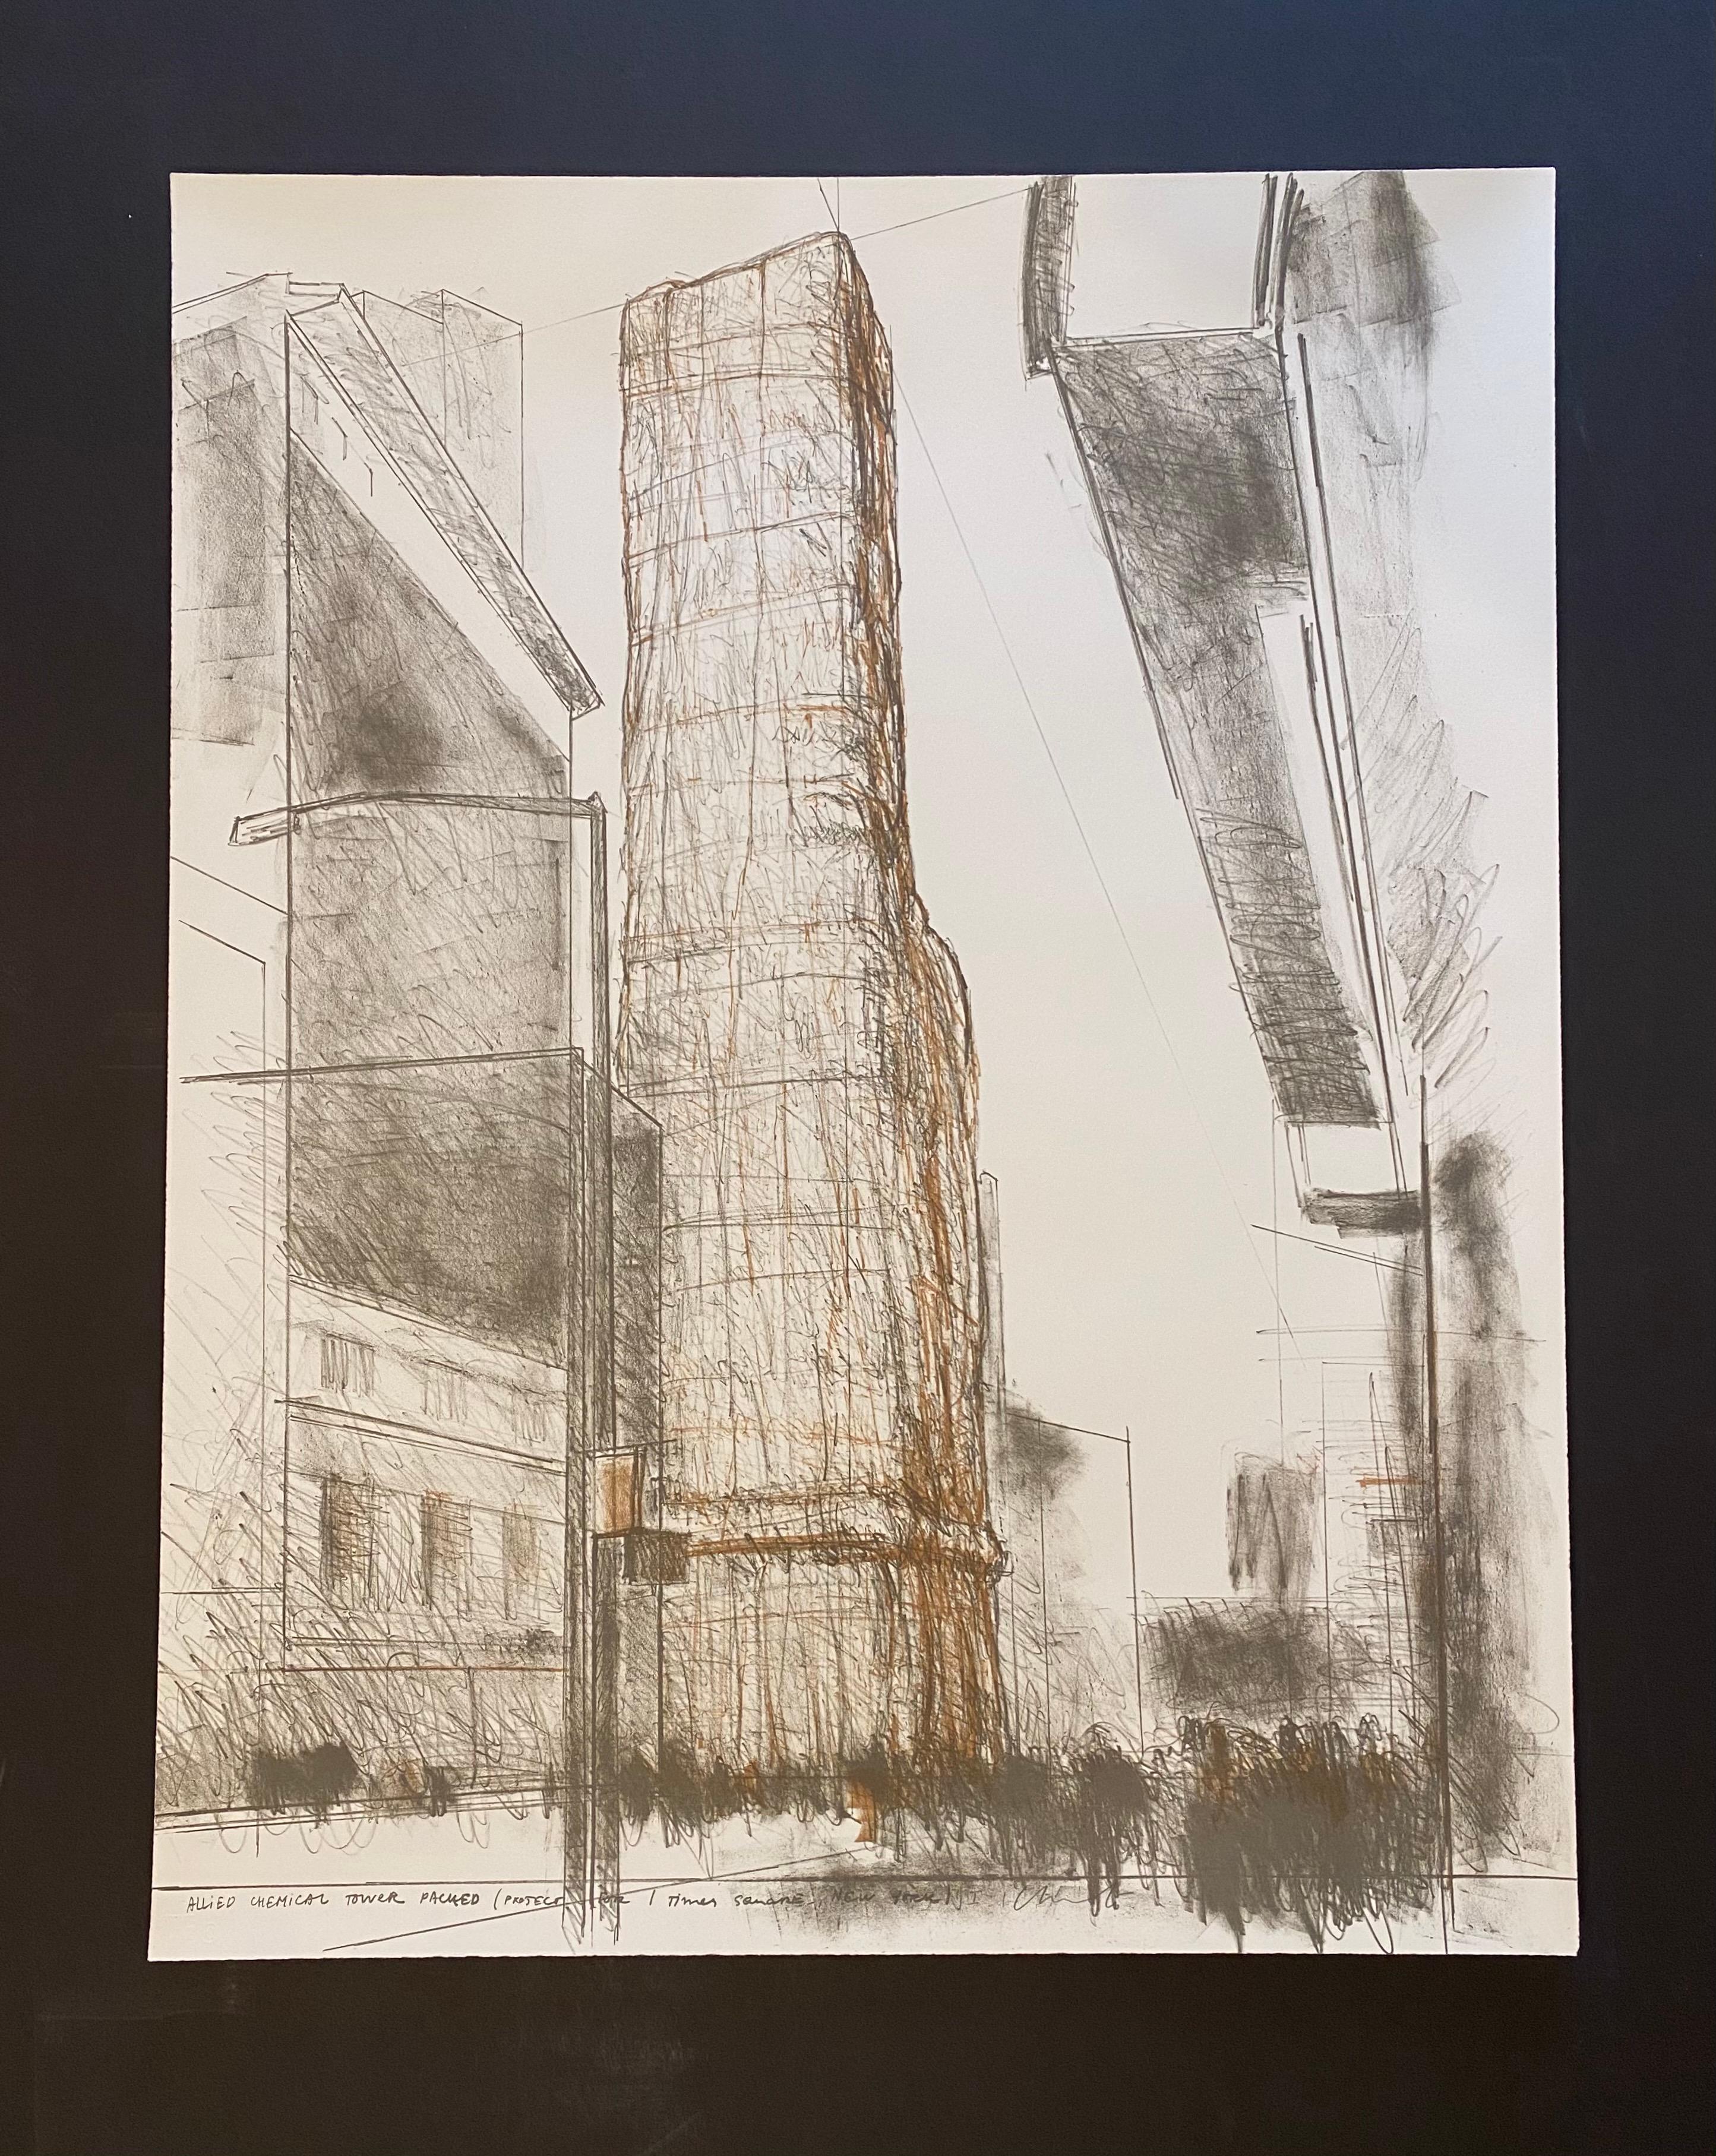 Allied Chemical Tower Packed (Project for One Times Square, New York) - Print by Christo and Jeanne-Claude